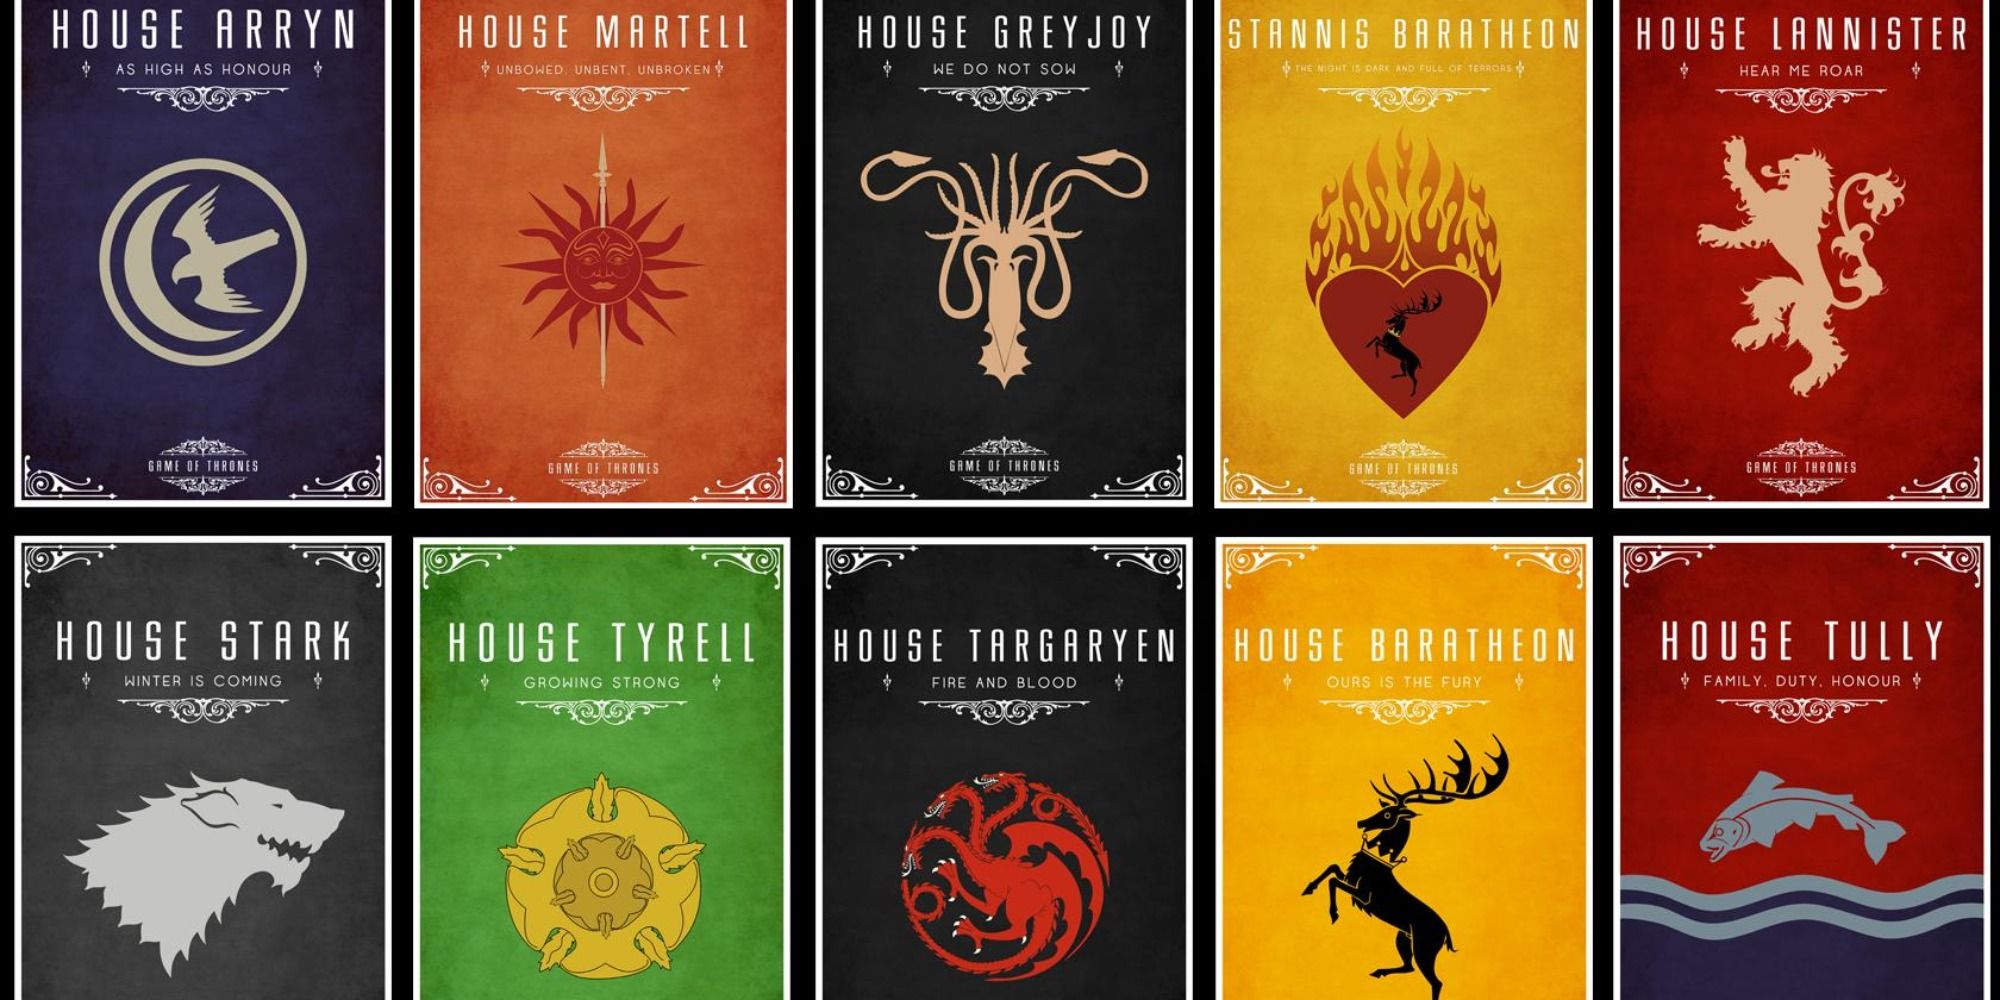 Game Of Thrones Every Great House Ranked By How Many Members Survived The Events Of The Show